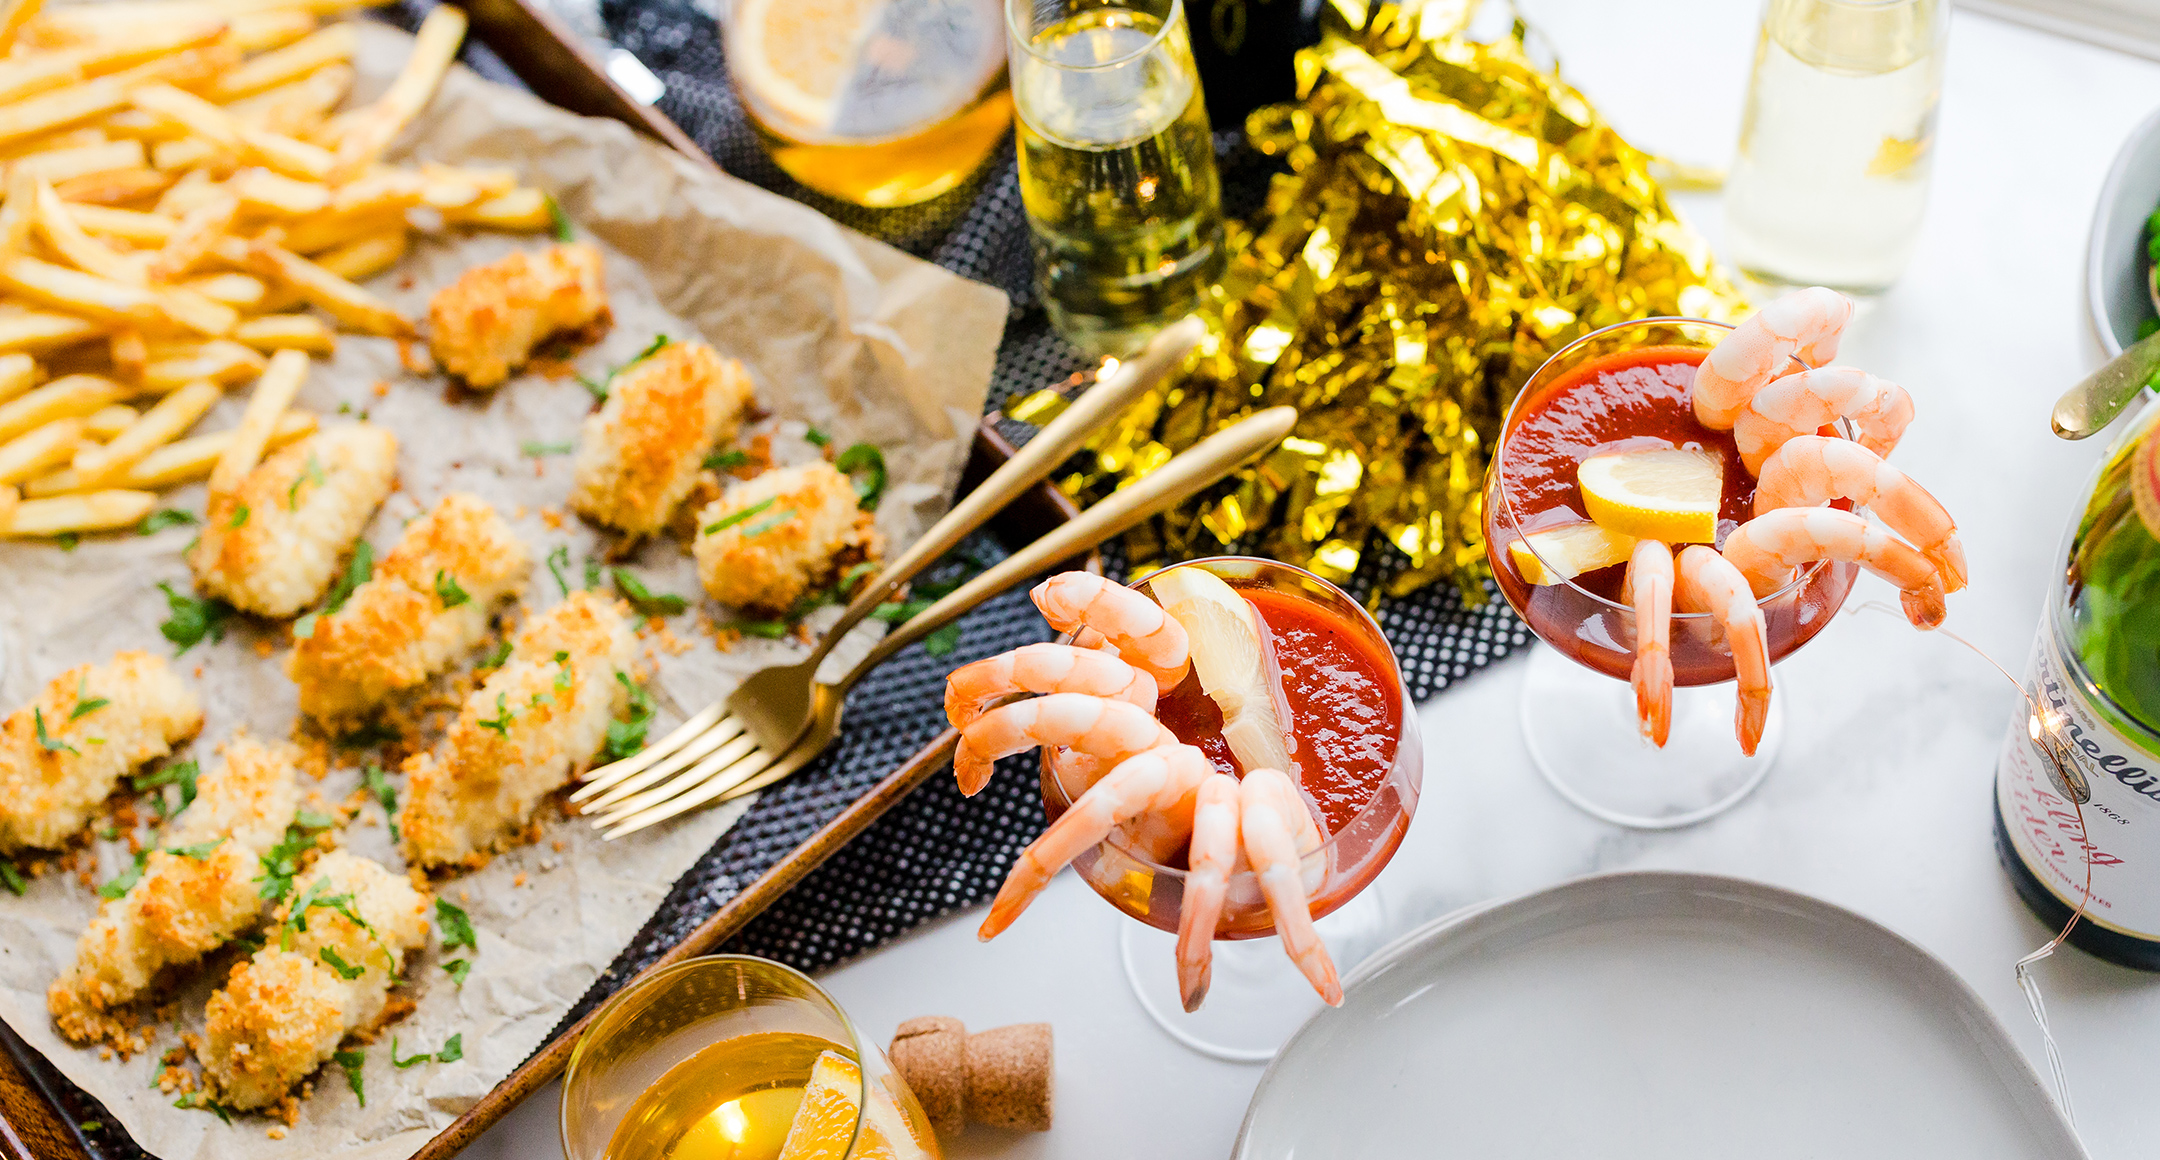 A party spread featuring sheet-pan fish & chips, shrimp lining a glass filled with cocktail sauce, and a glass of champagne.